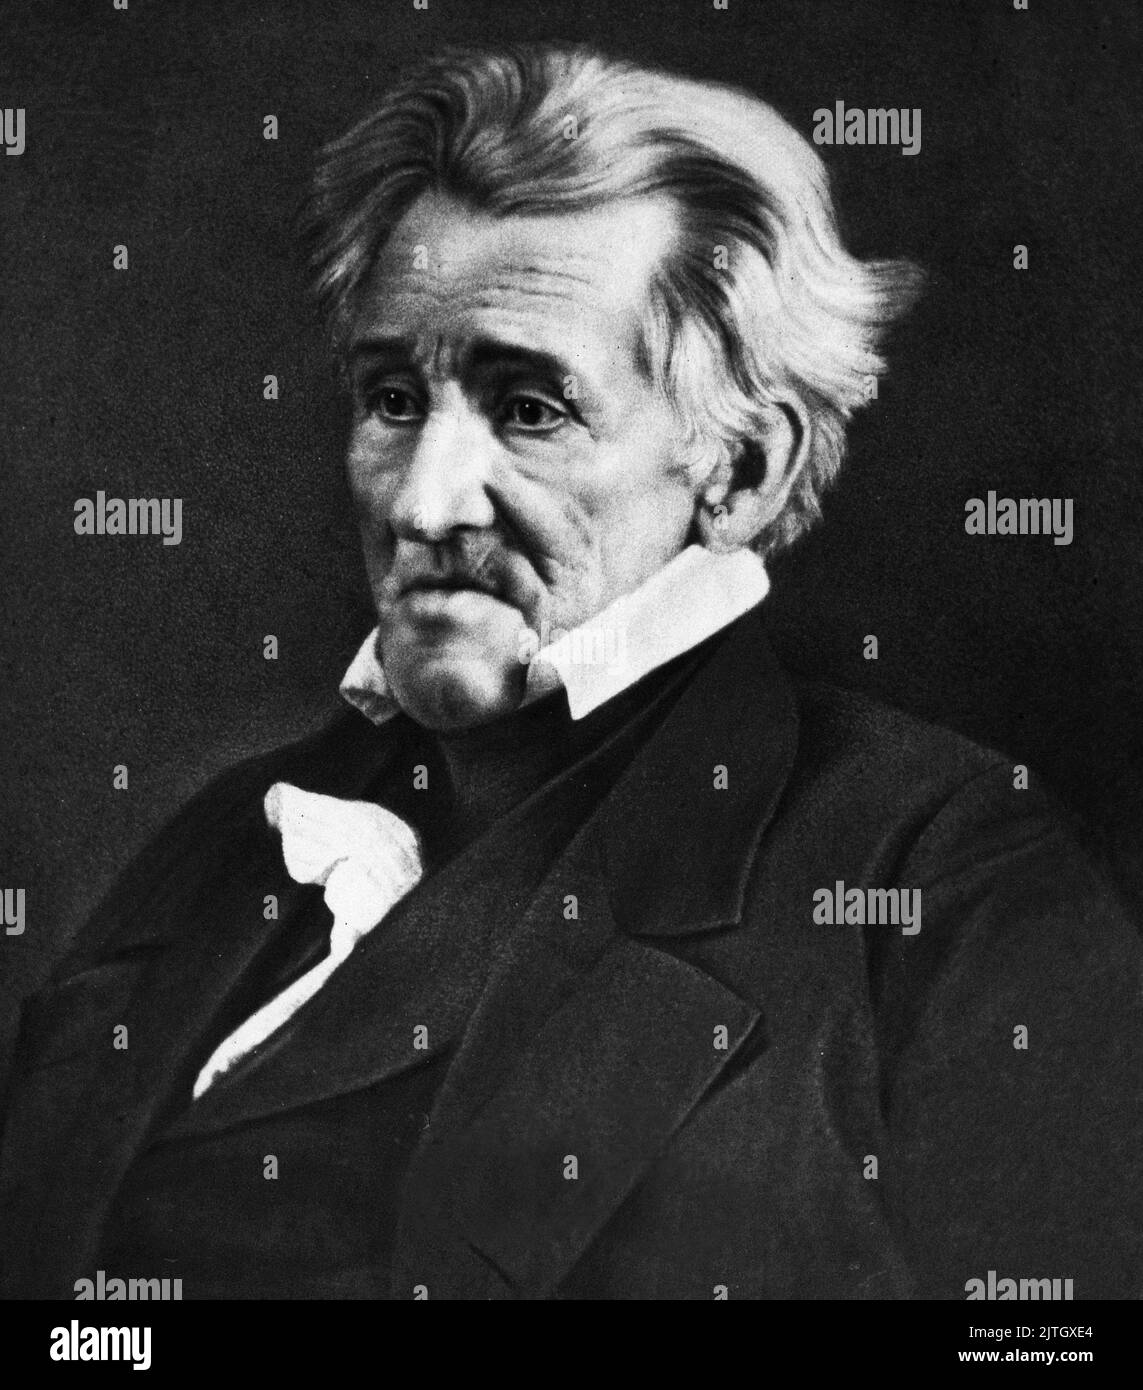 A mezzotint fromr a daguerreotype of Andrew Jackson by Mathew Brady, April 15, 1845. Andrew Jackson was the seventh president of the USA. In this photo he was 78. Stock Photo